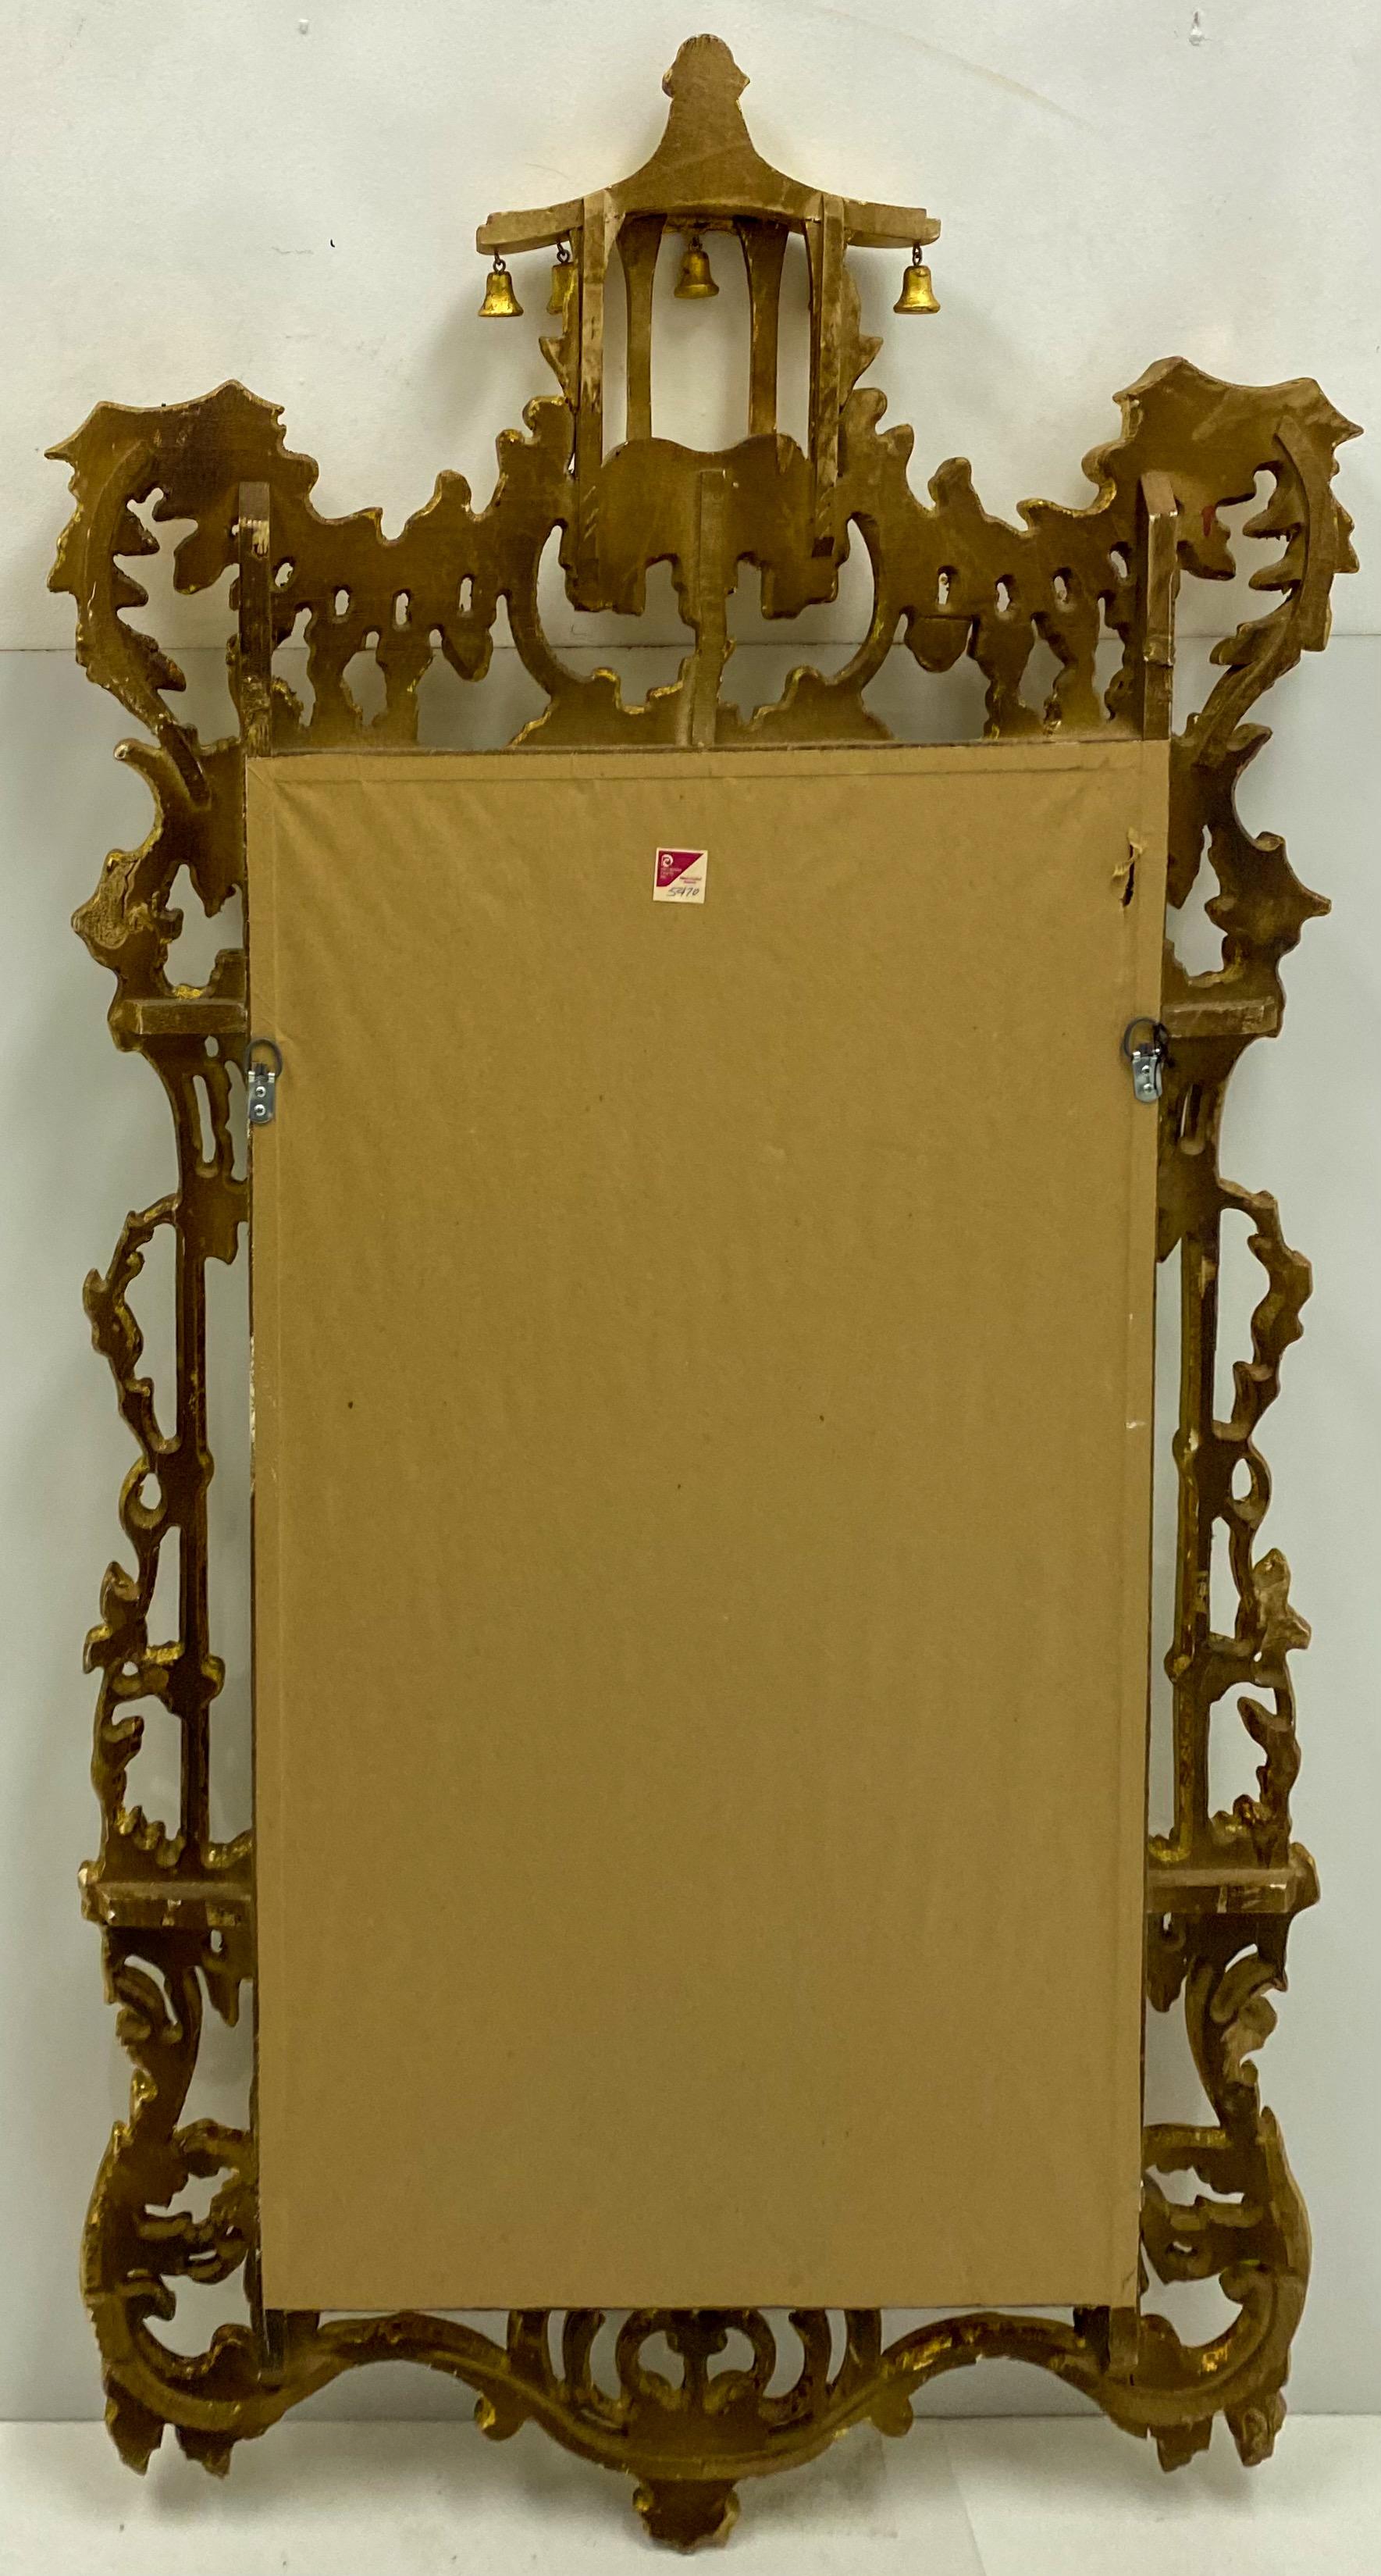 This is a Chinese Chippendale style carved giltwood Italian mirror by Decorative Crafts. It is in very good condition, and it does have the label.